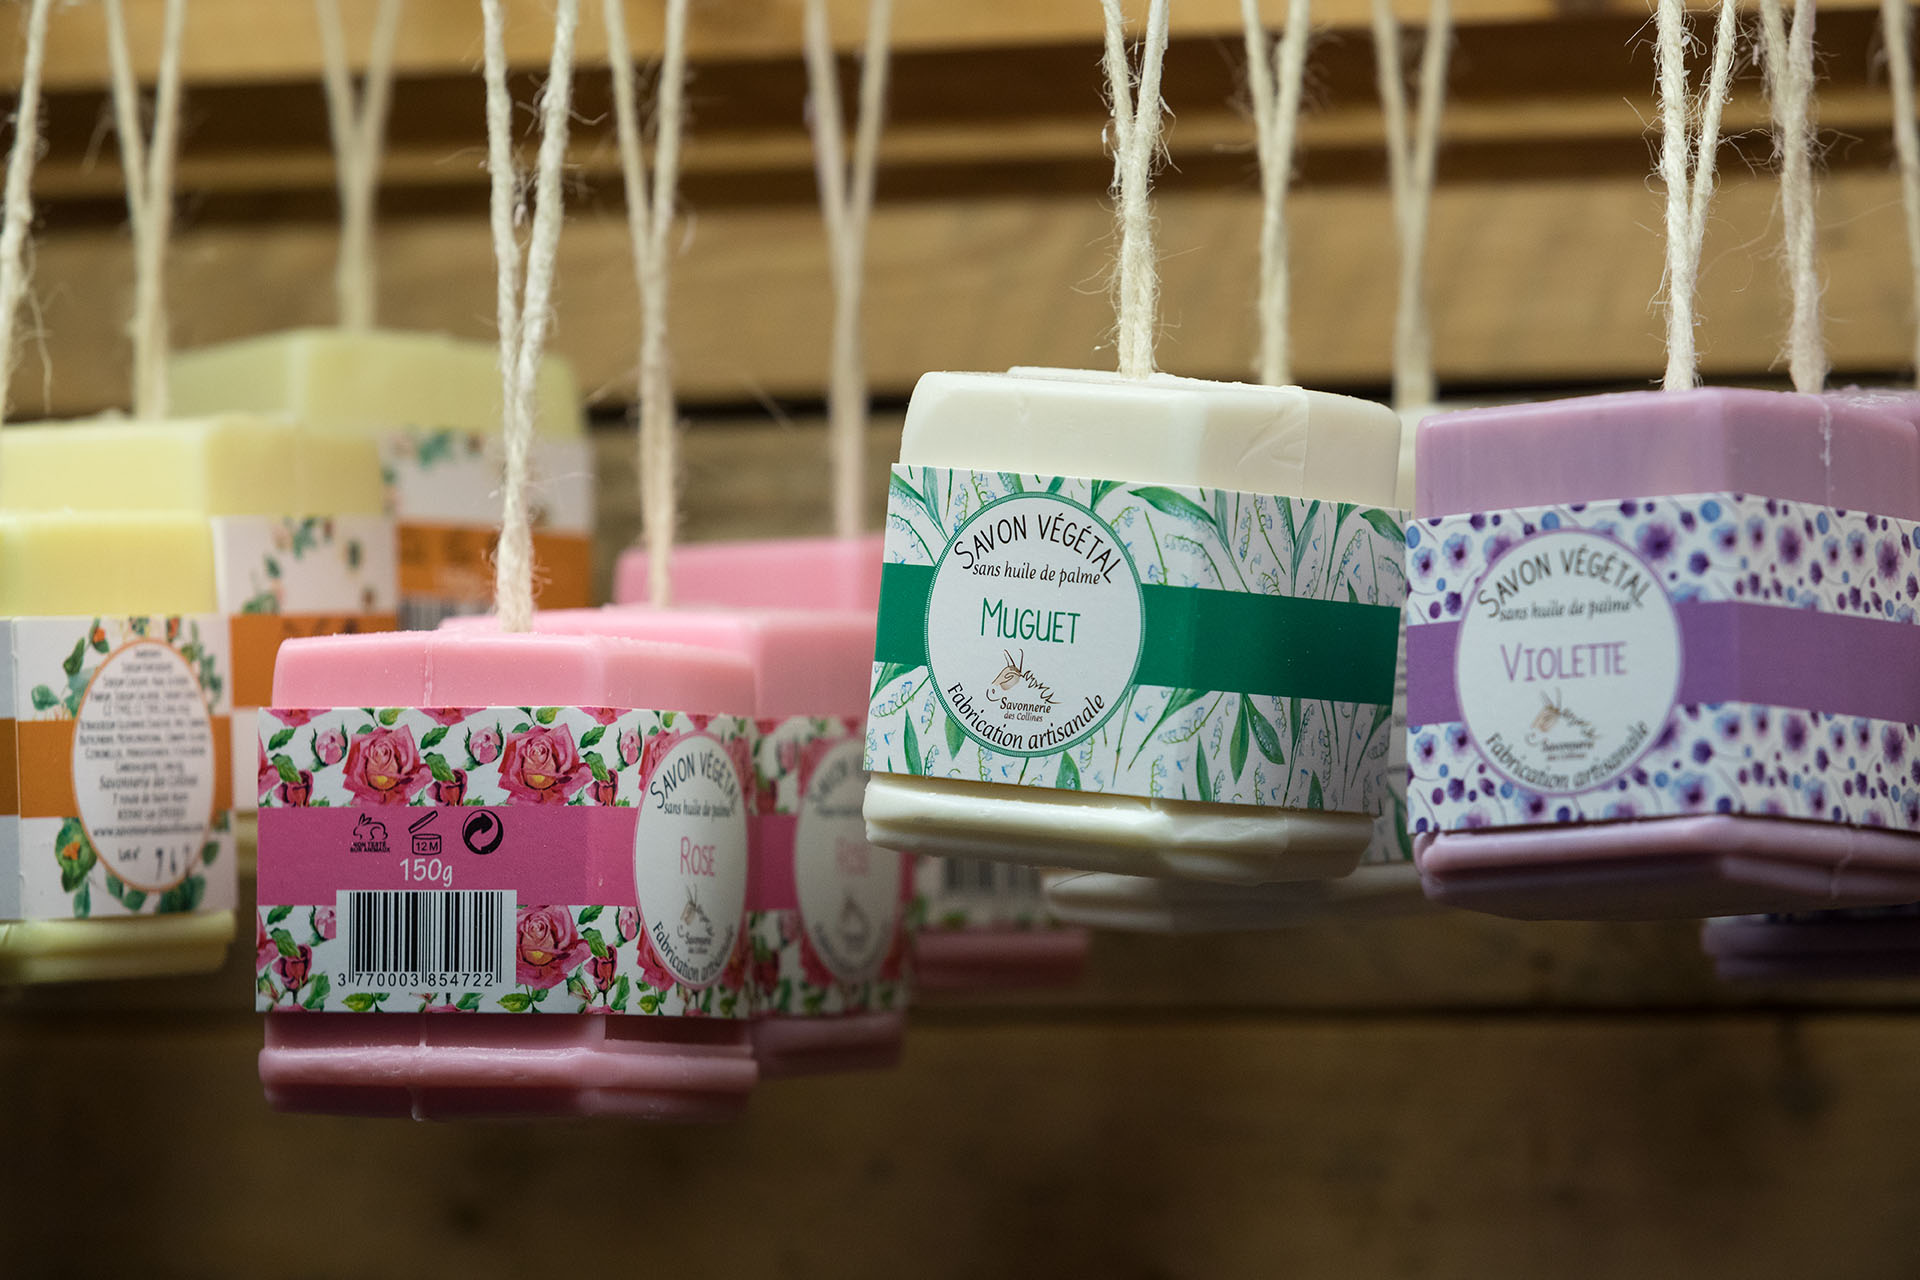 Soaps from Savonnerie des Collines